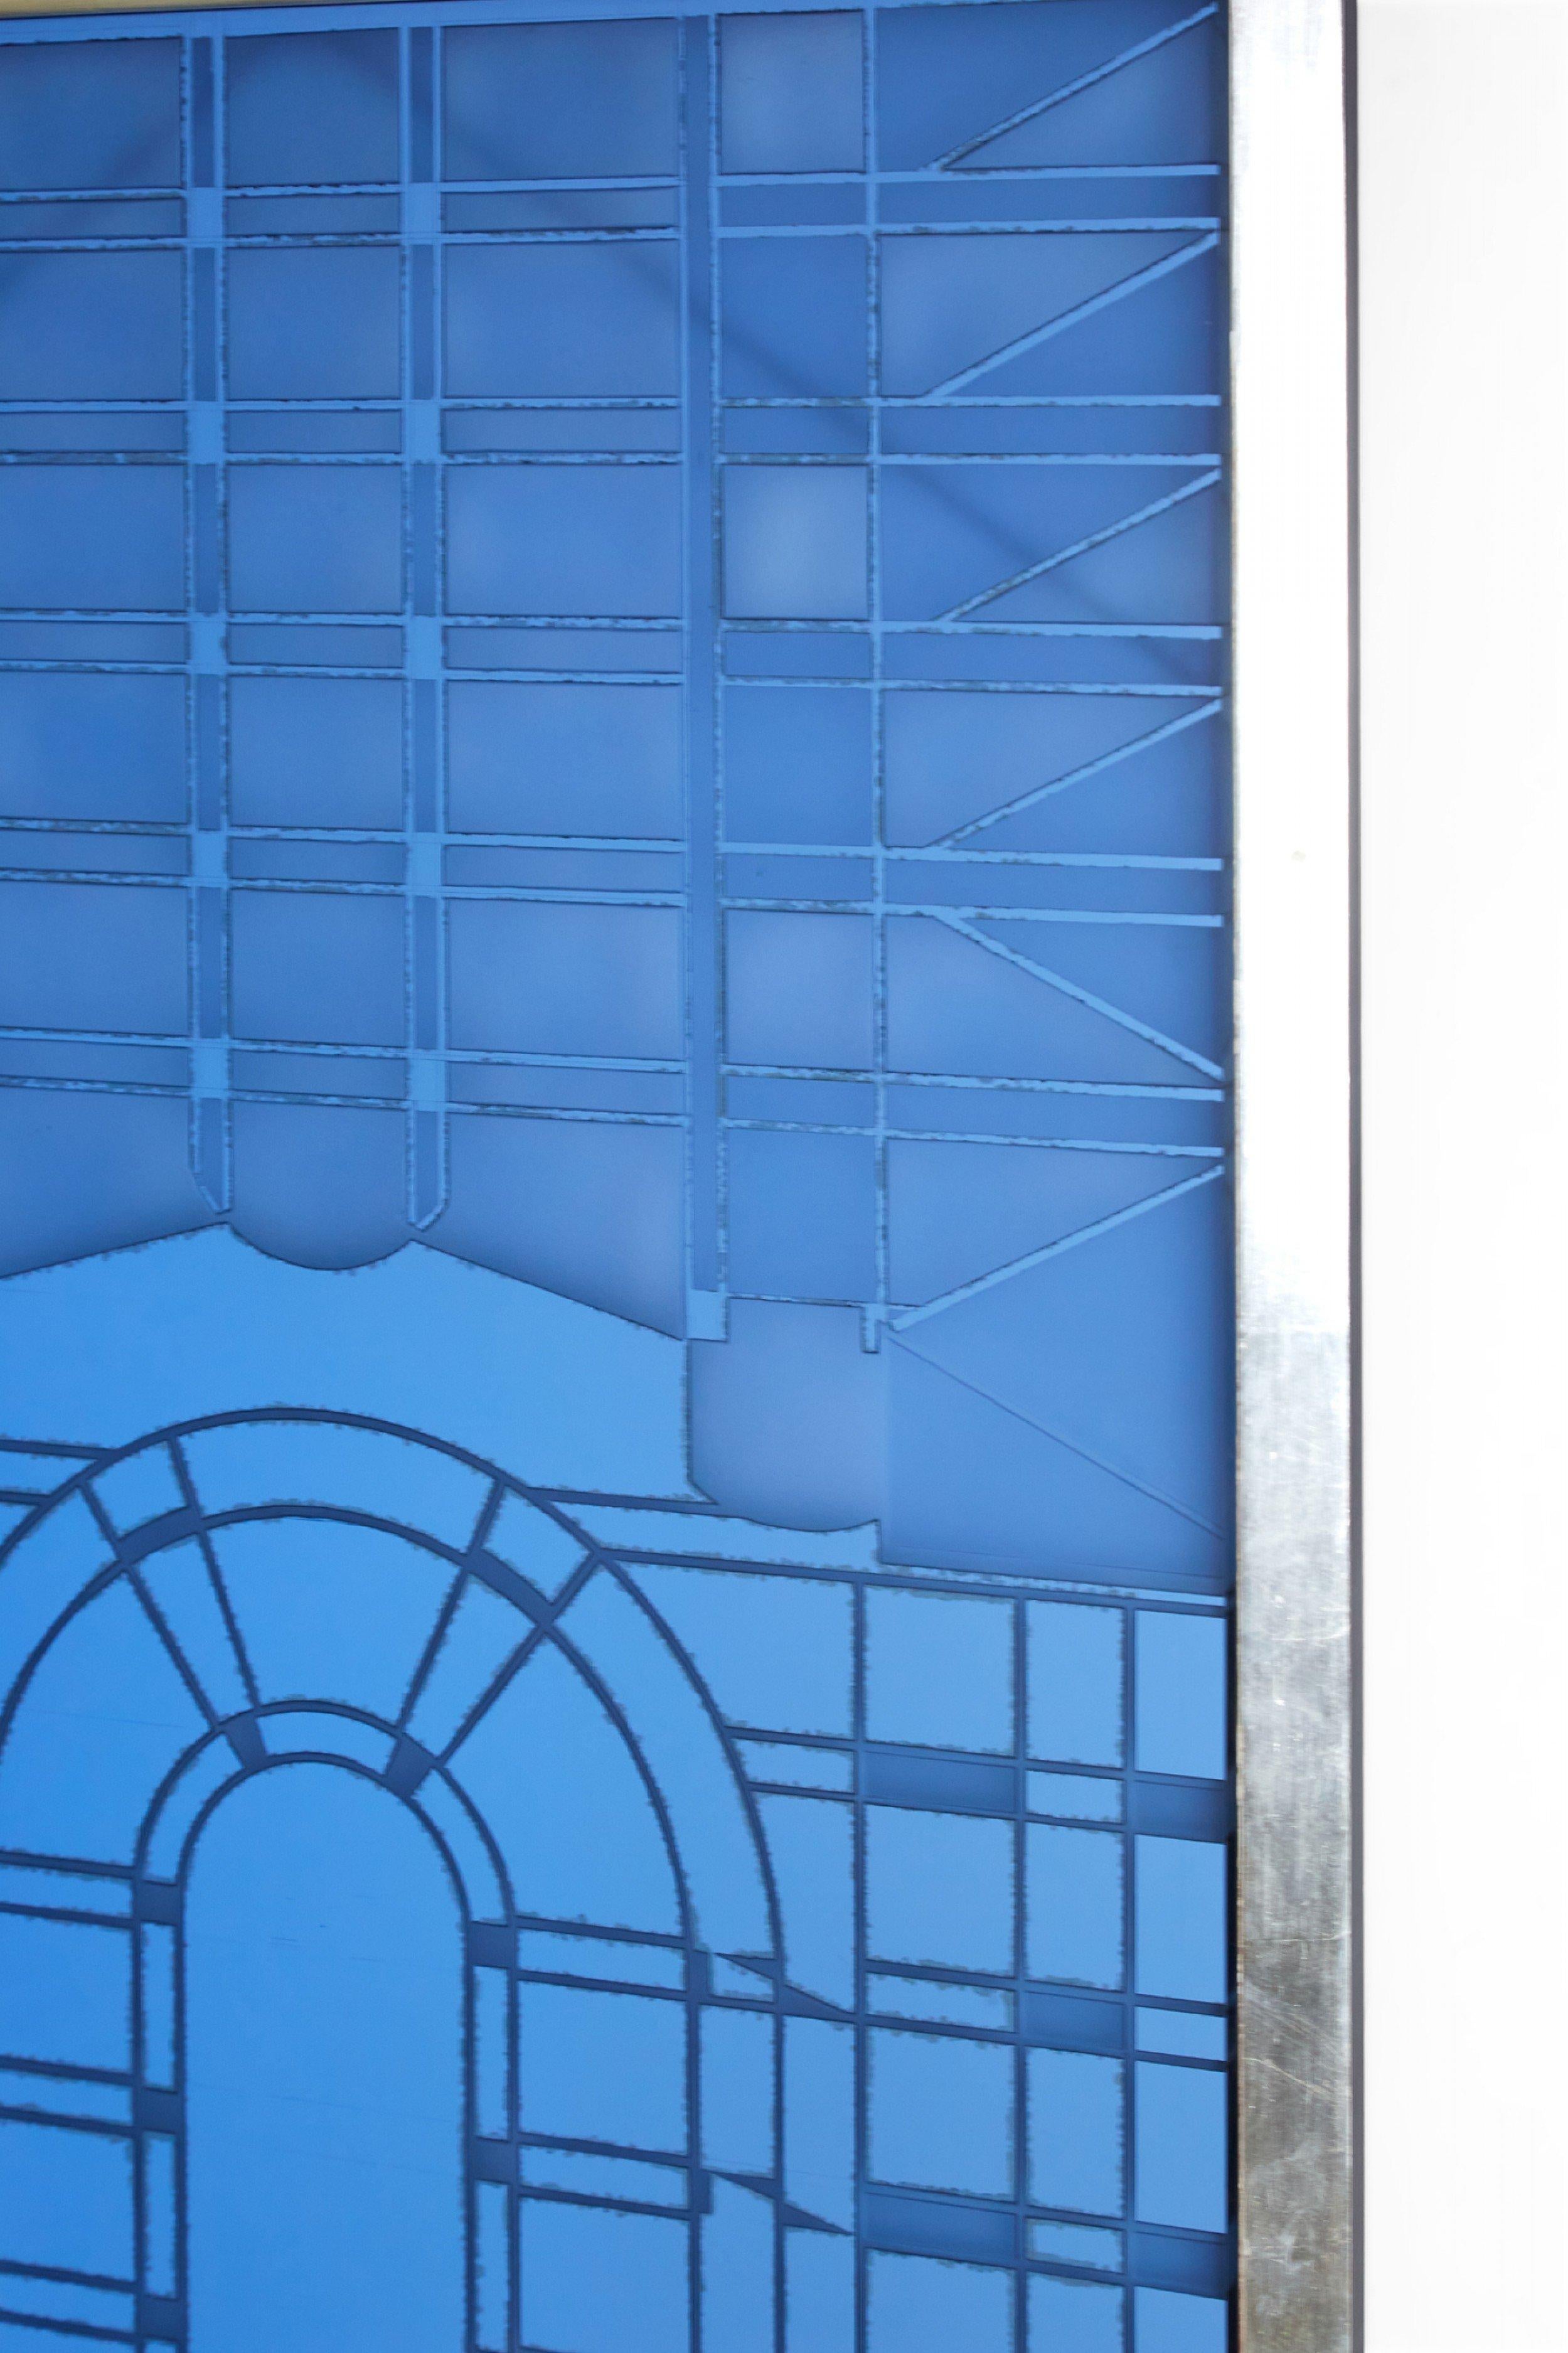 American Art Deco-Style framed glass mirror panel featuring geometric designs in blue and silver in a rectangular silver leaf frame.
 